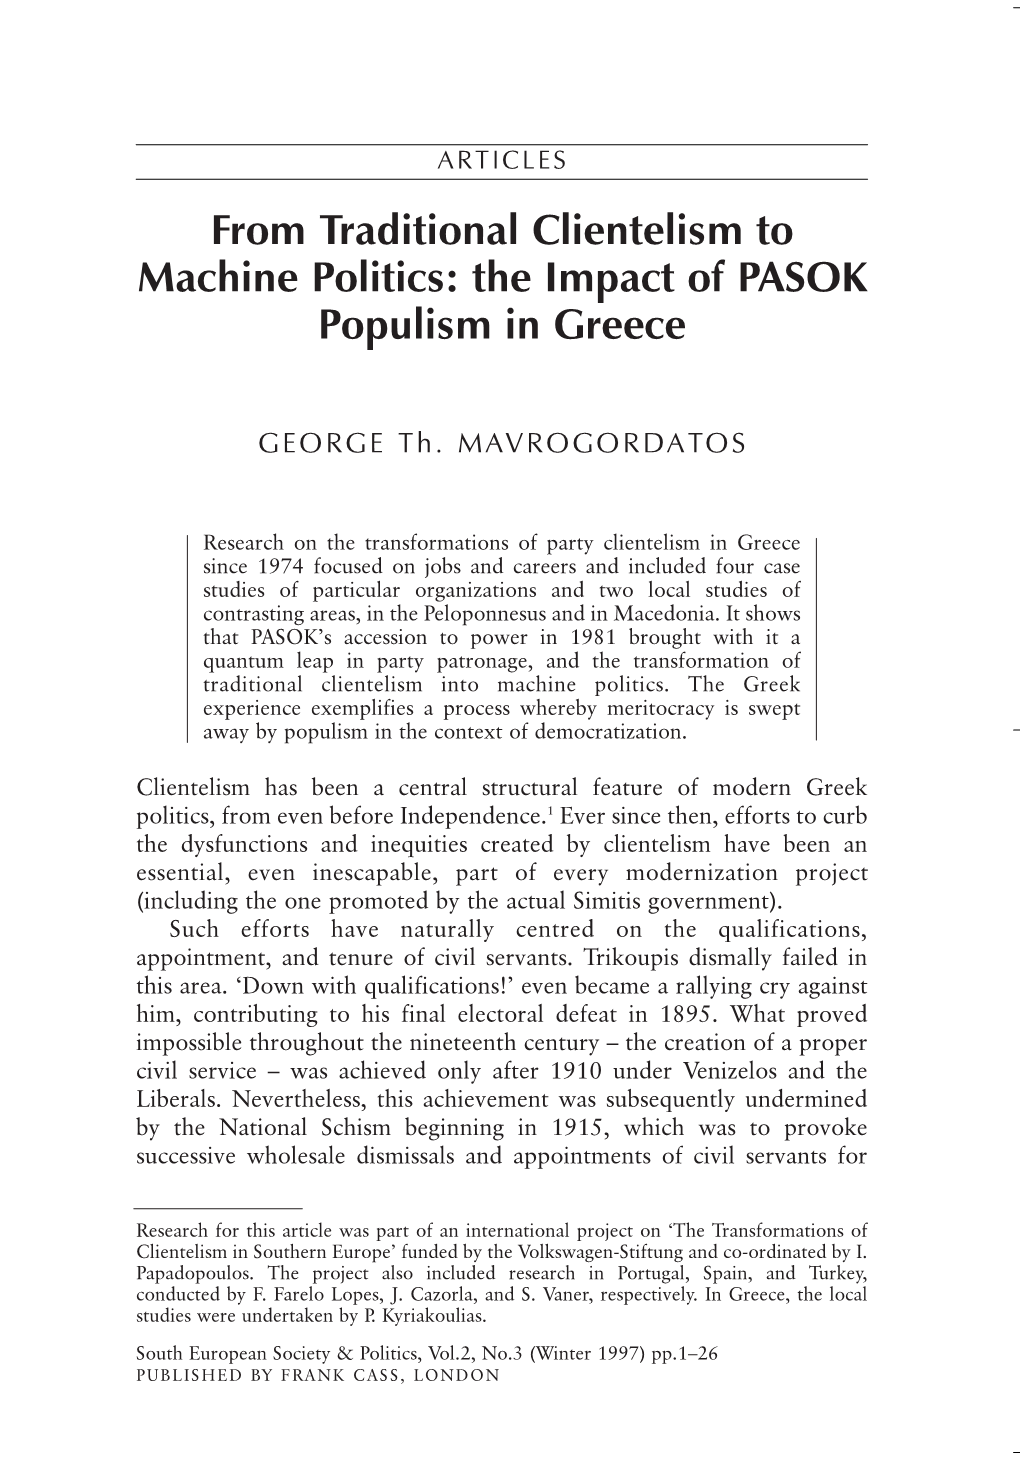 From Traditional Clientelism to Machine Politics: the Impact of PASOK Populism in Greece